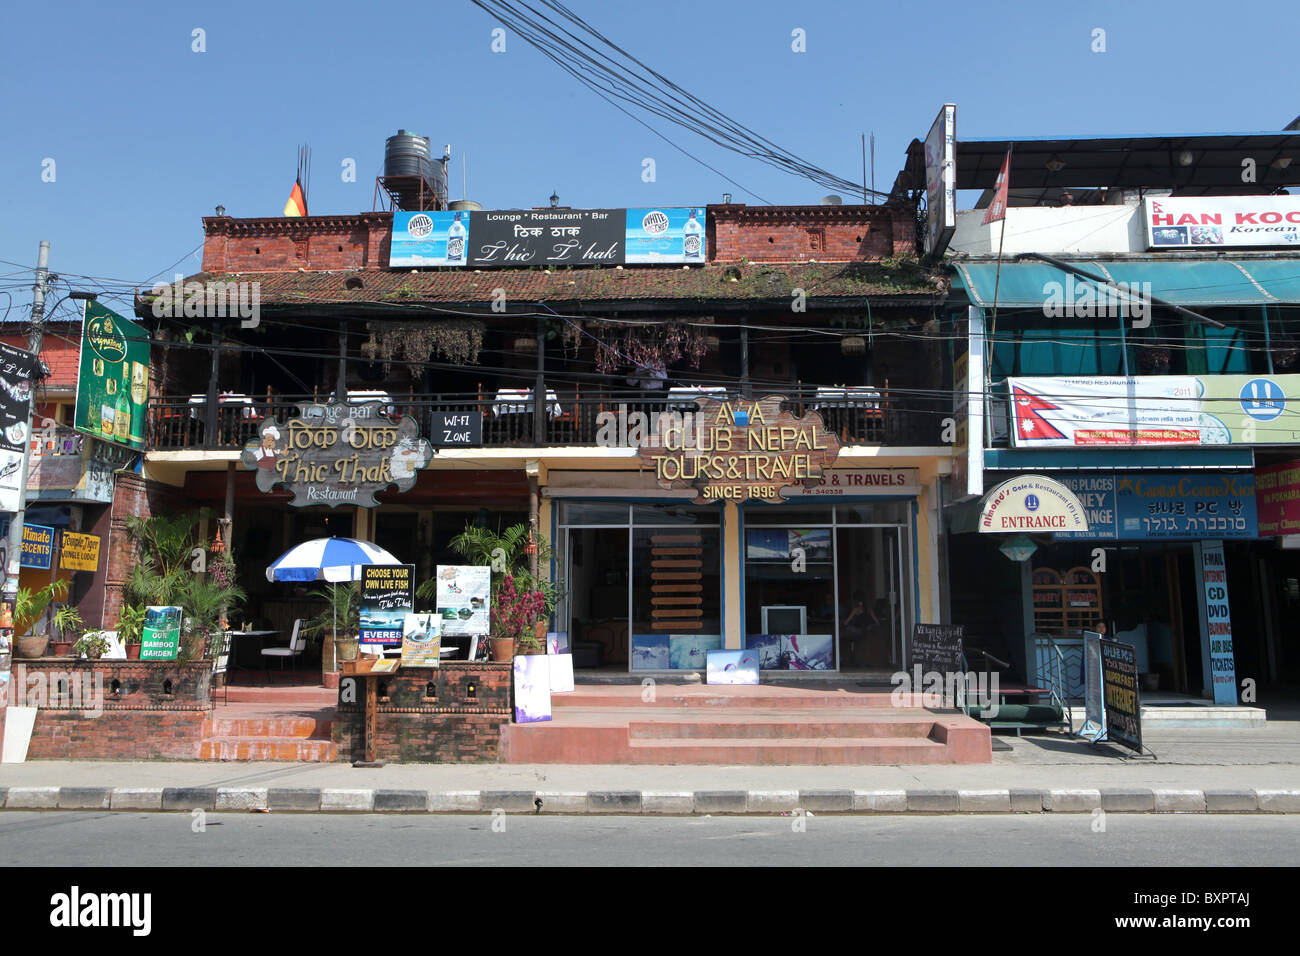 Travel and tour shops in the city of Pokhara in Nepal. Stock Photo